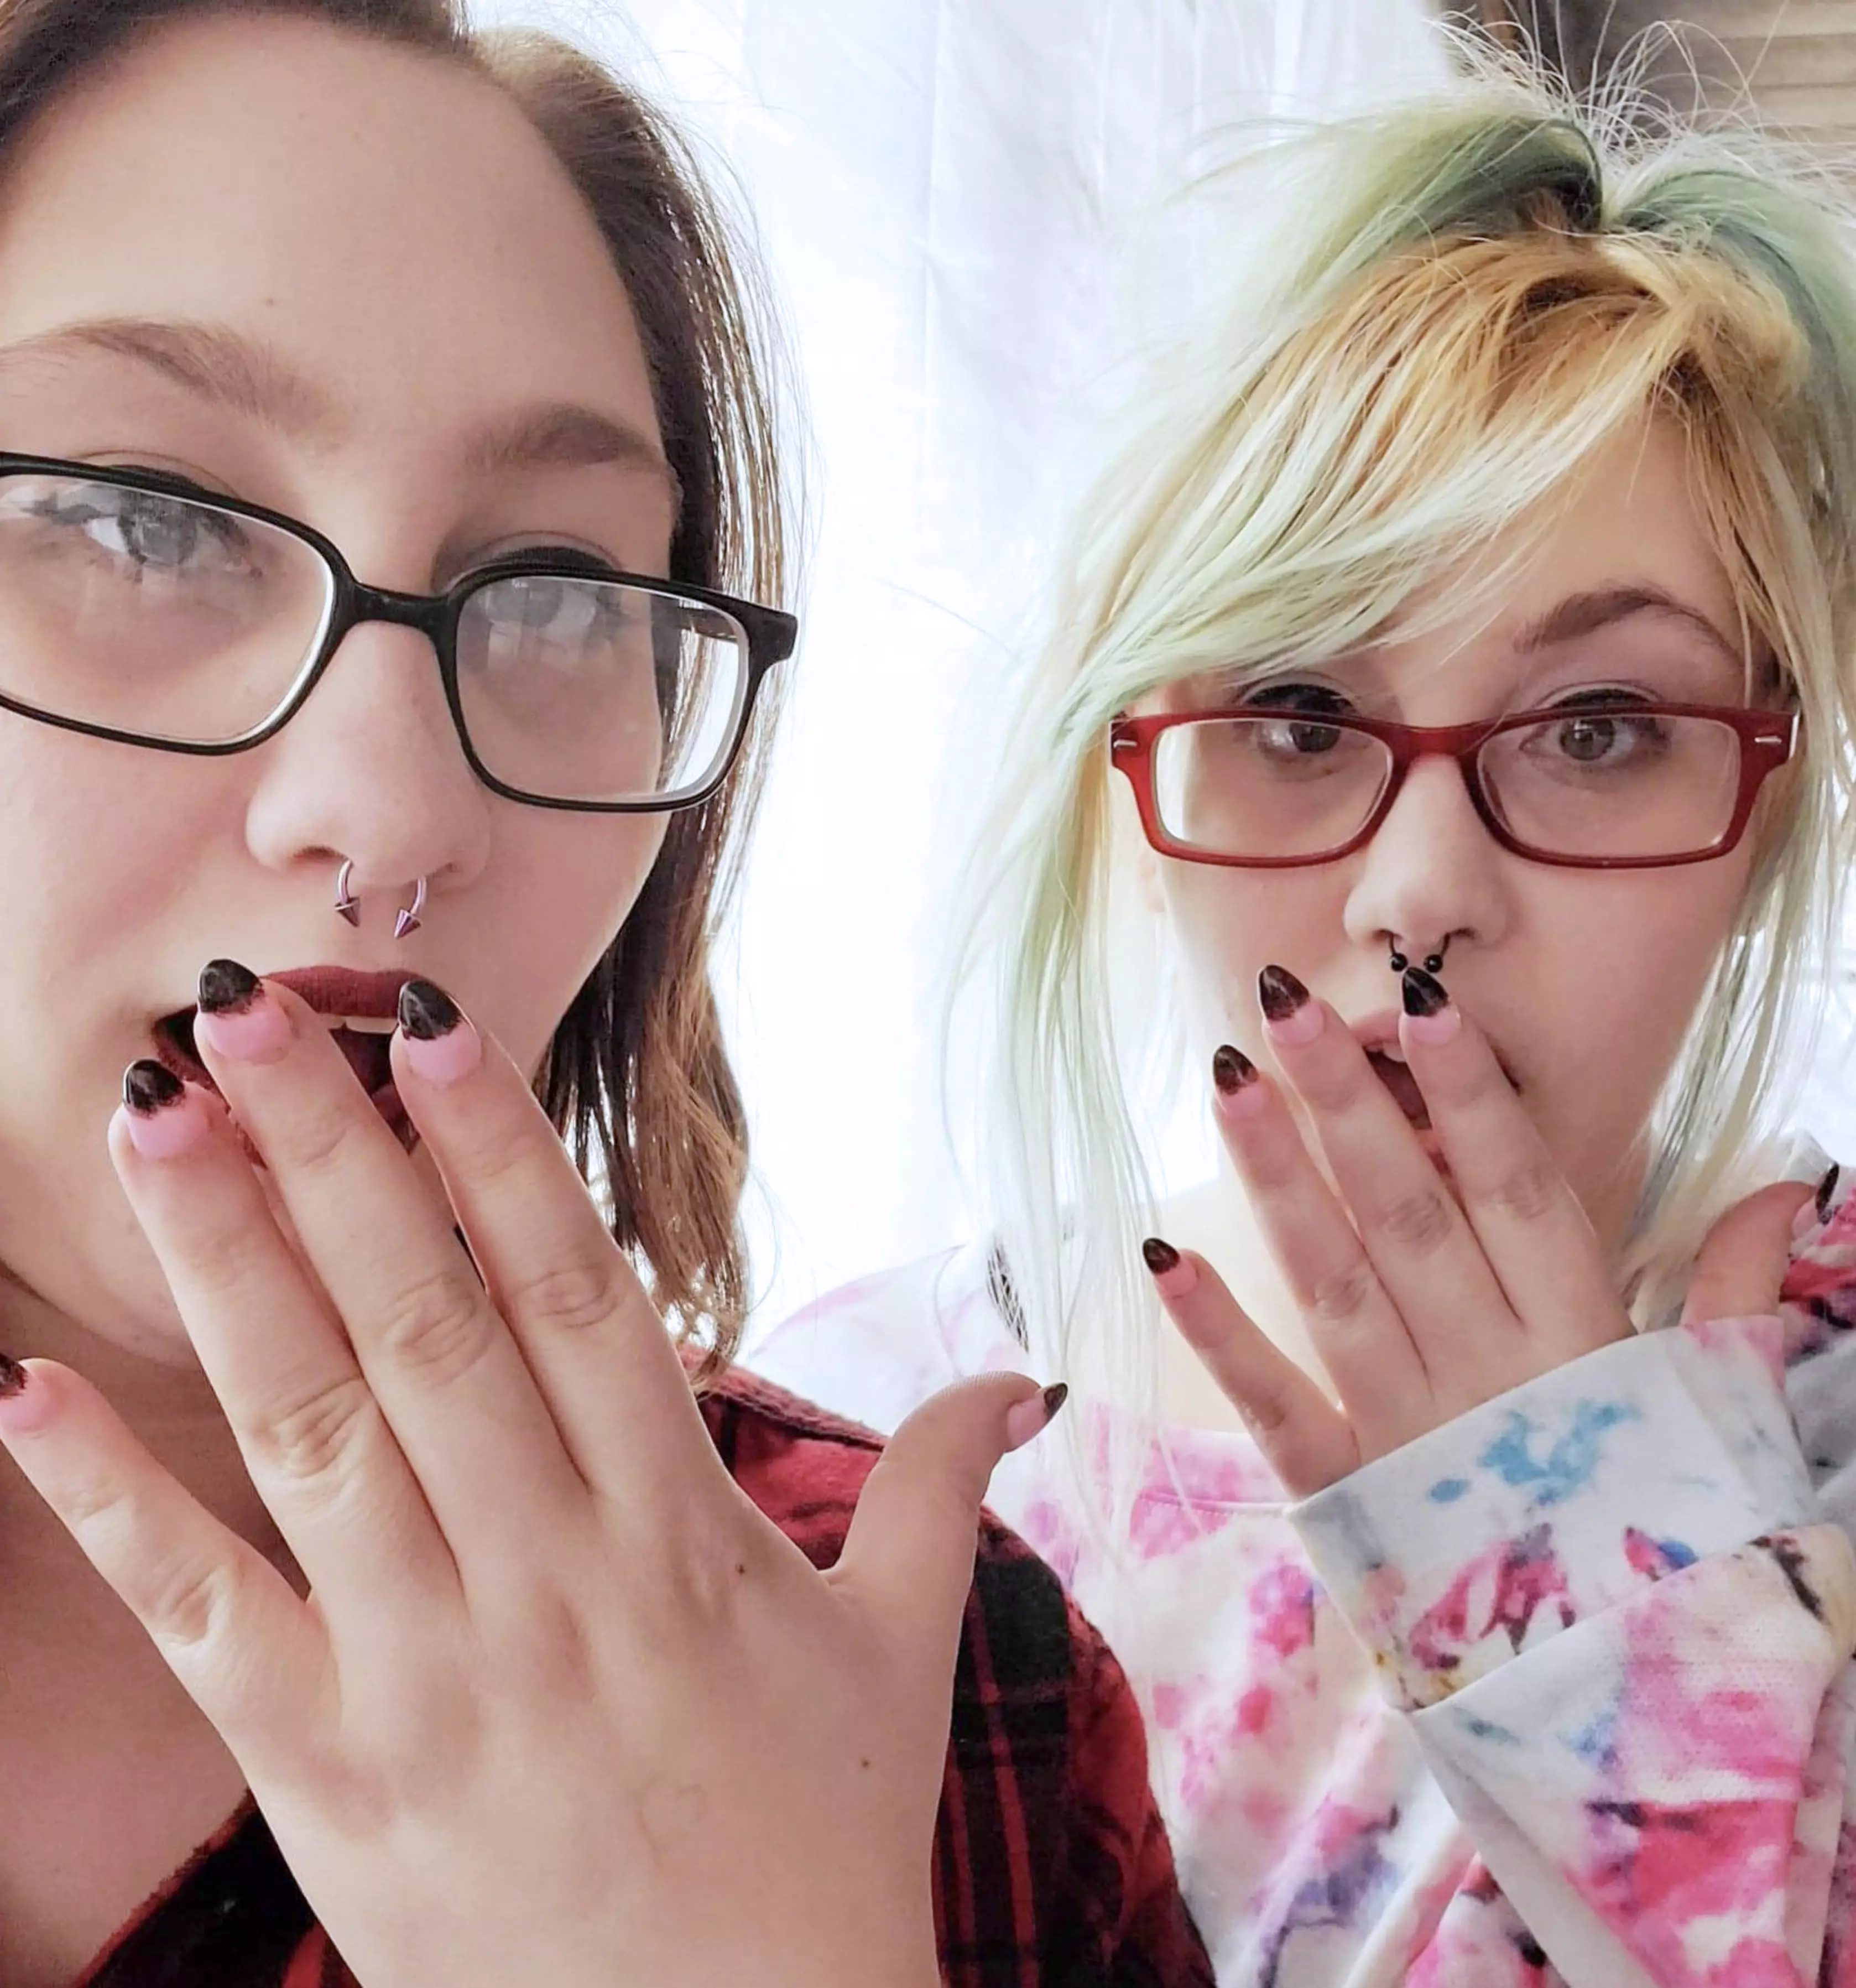 Serina and her twin sister Cheyanne had decided to get matching manis to celebrate a recent promotion (